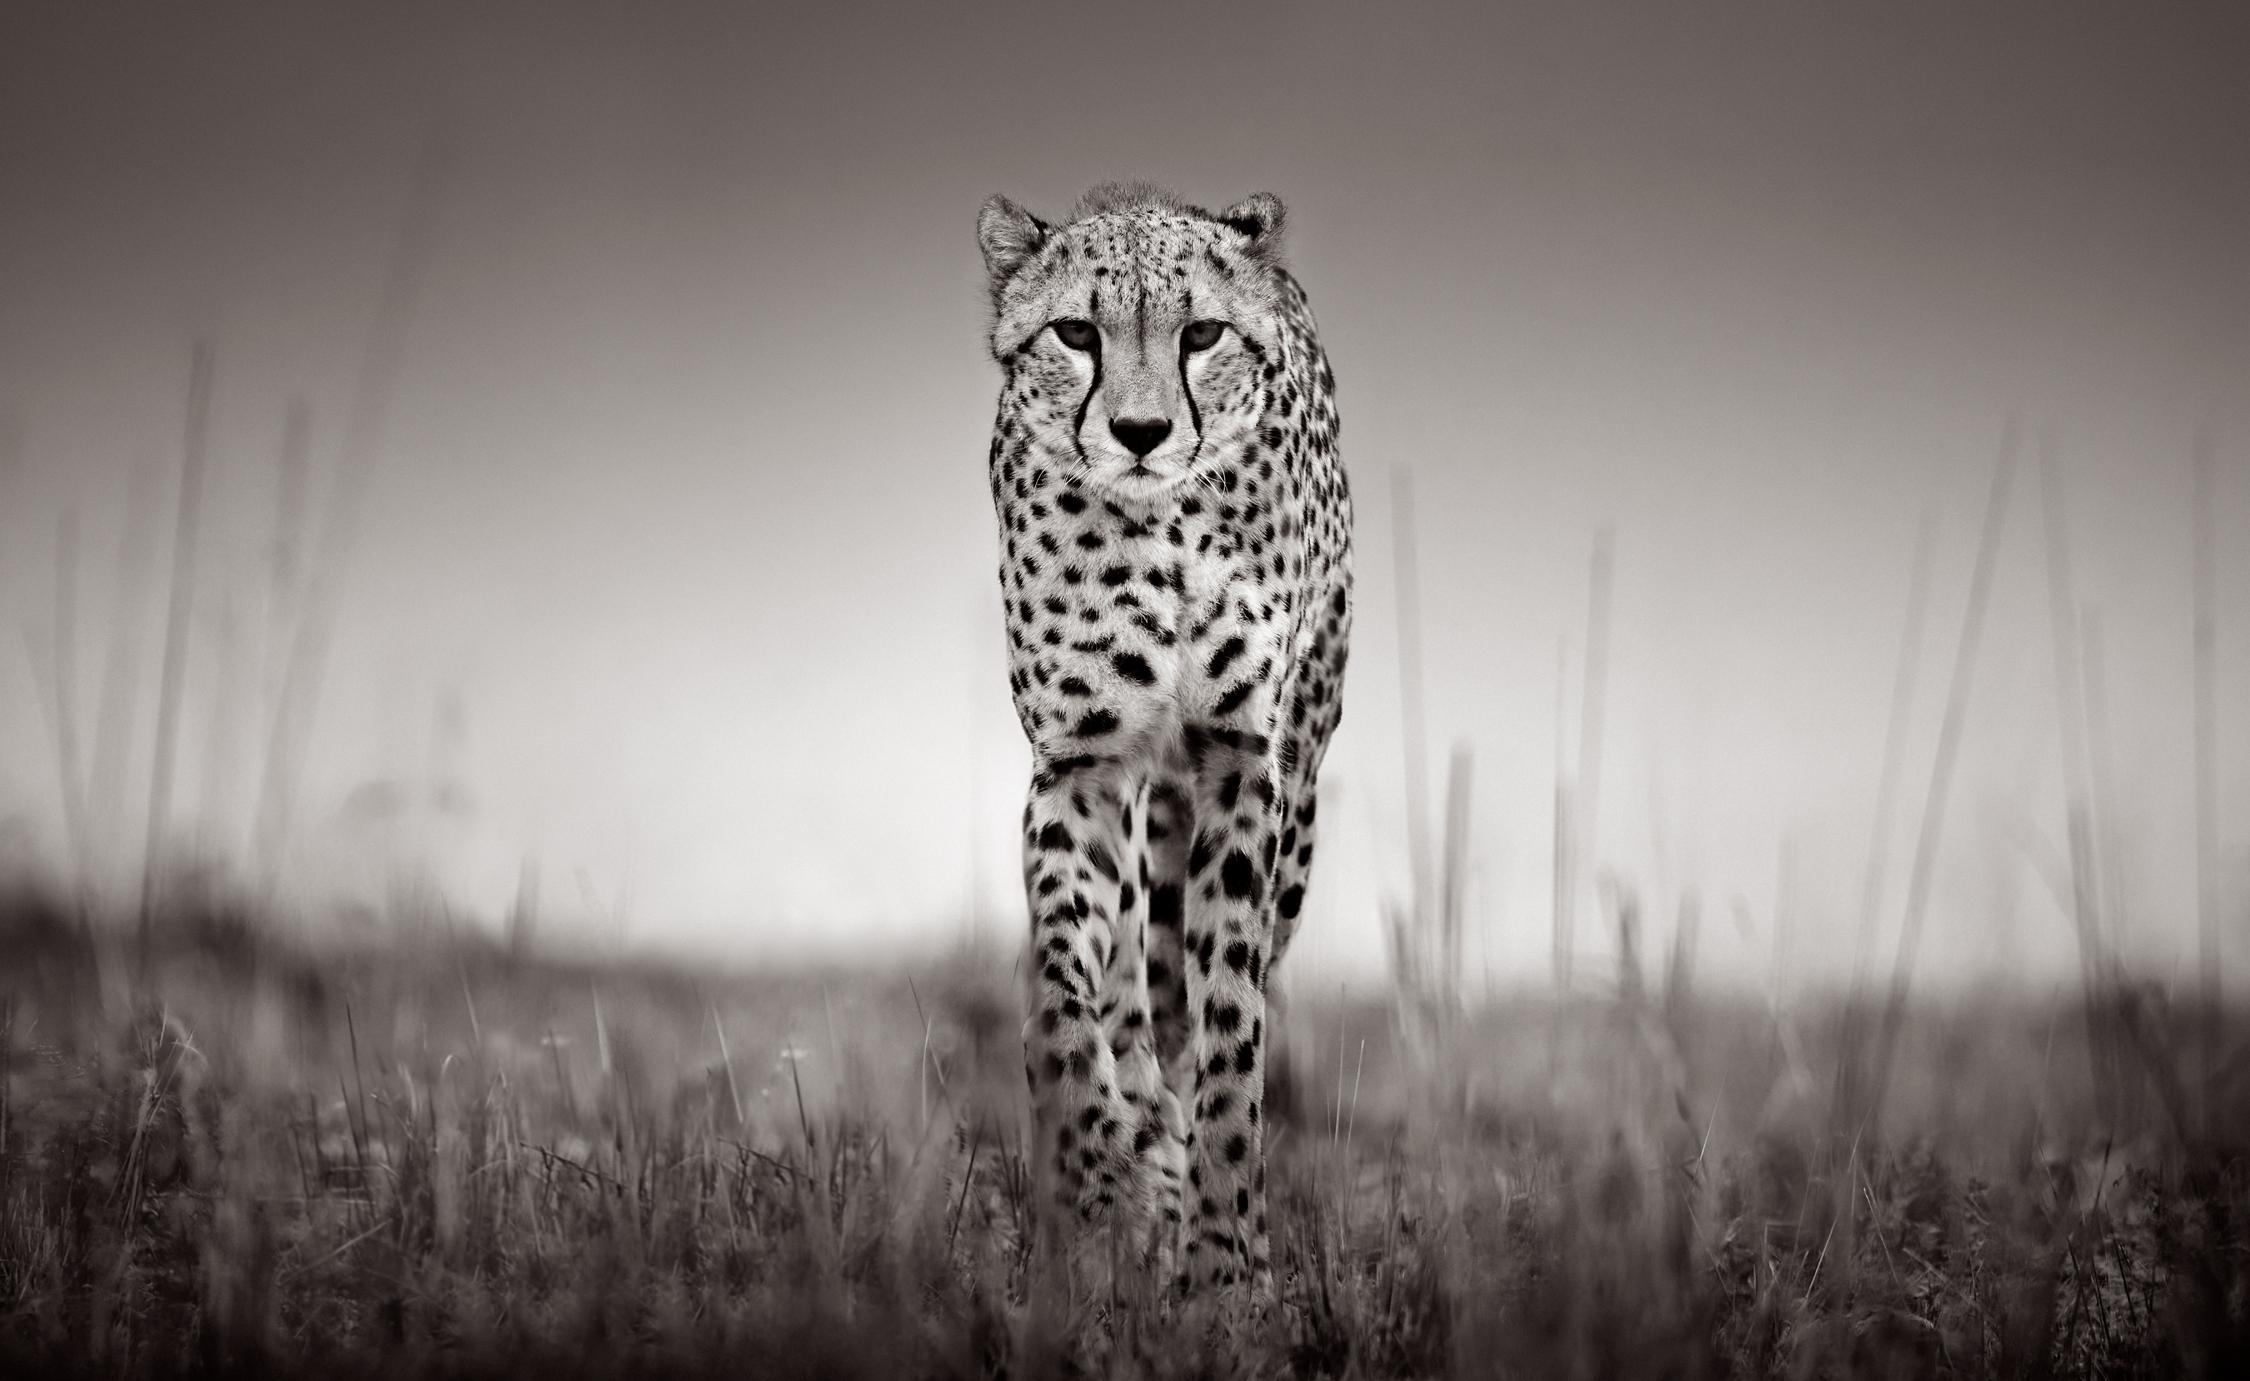 Drew Doggett Black and White Photograph - Portrait of a Cheetah Walking Towards the Camera in the Grass